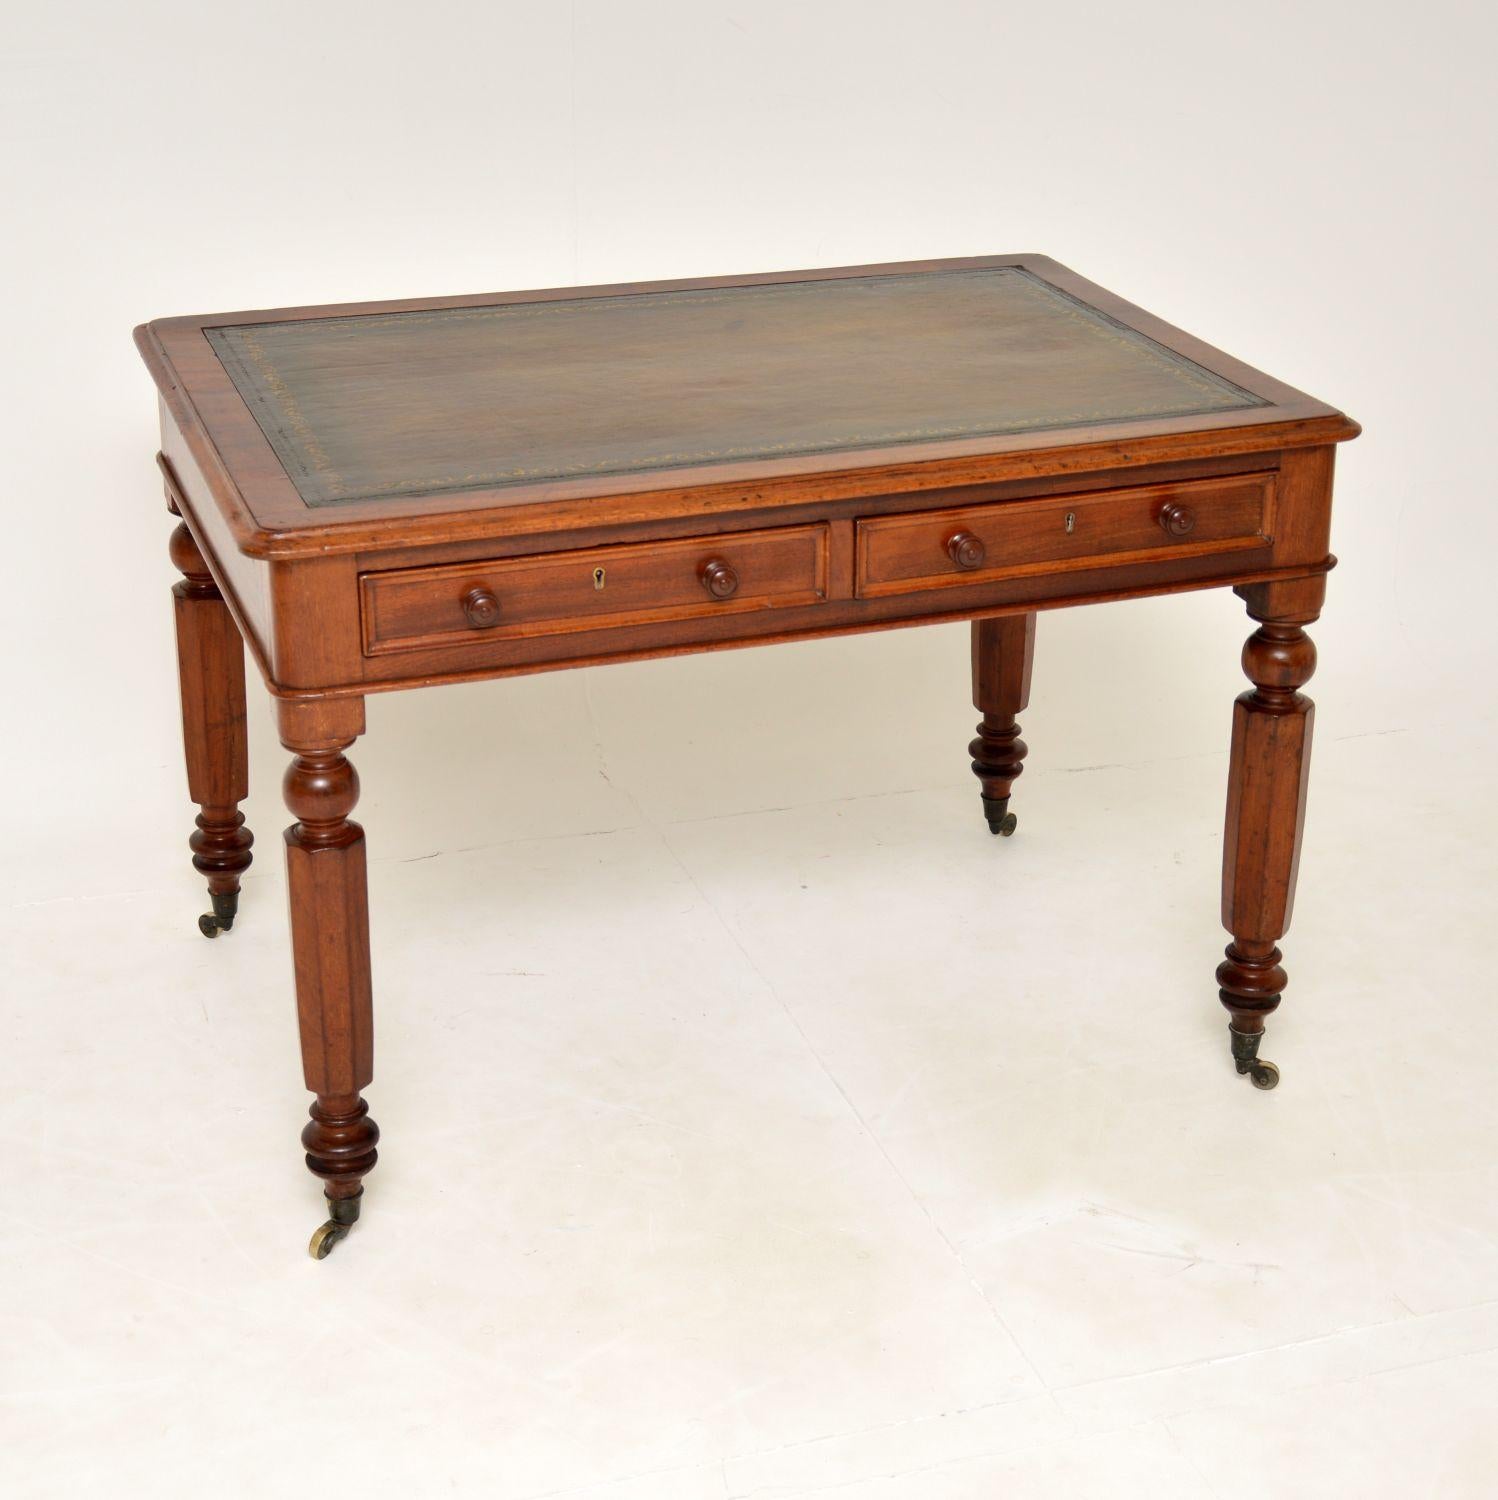 An excellent original antique William IV writing desk. This was made in England, it dates from the 1860-1880’s.

The quality is superb, it is a lovely size and this sits on turned octagonal wood legs with original brass casters. The drawers have